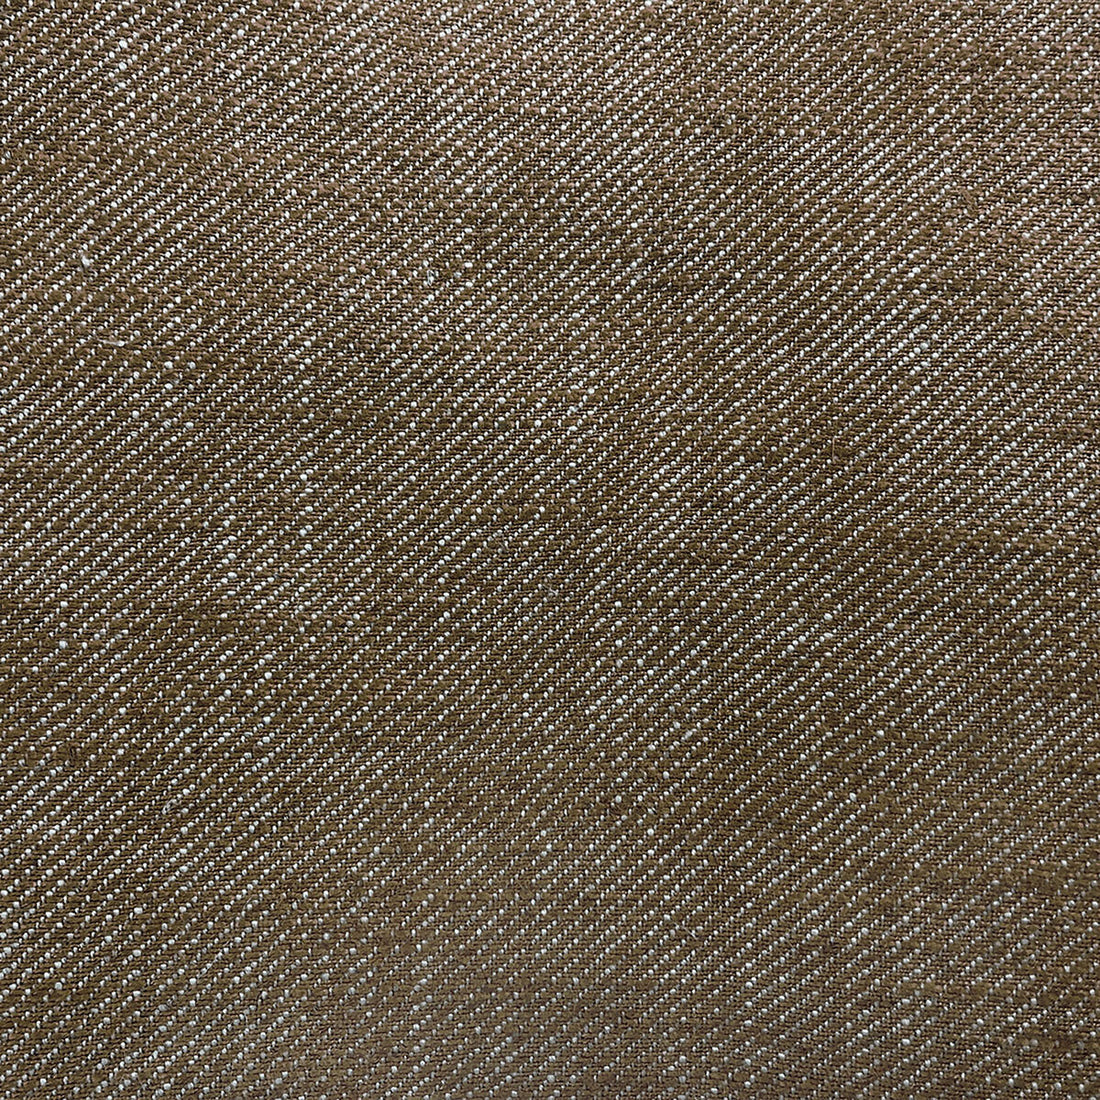 Hisa fabric in marron color - pattern GDT5639.006.0 - by Gaston y Daniela in the Gaston Japon collection